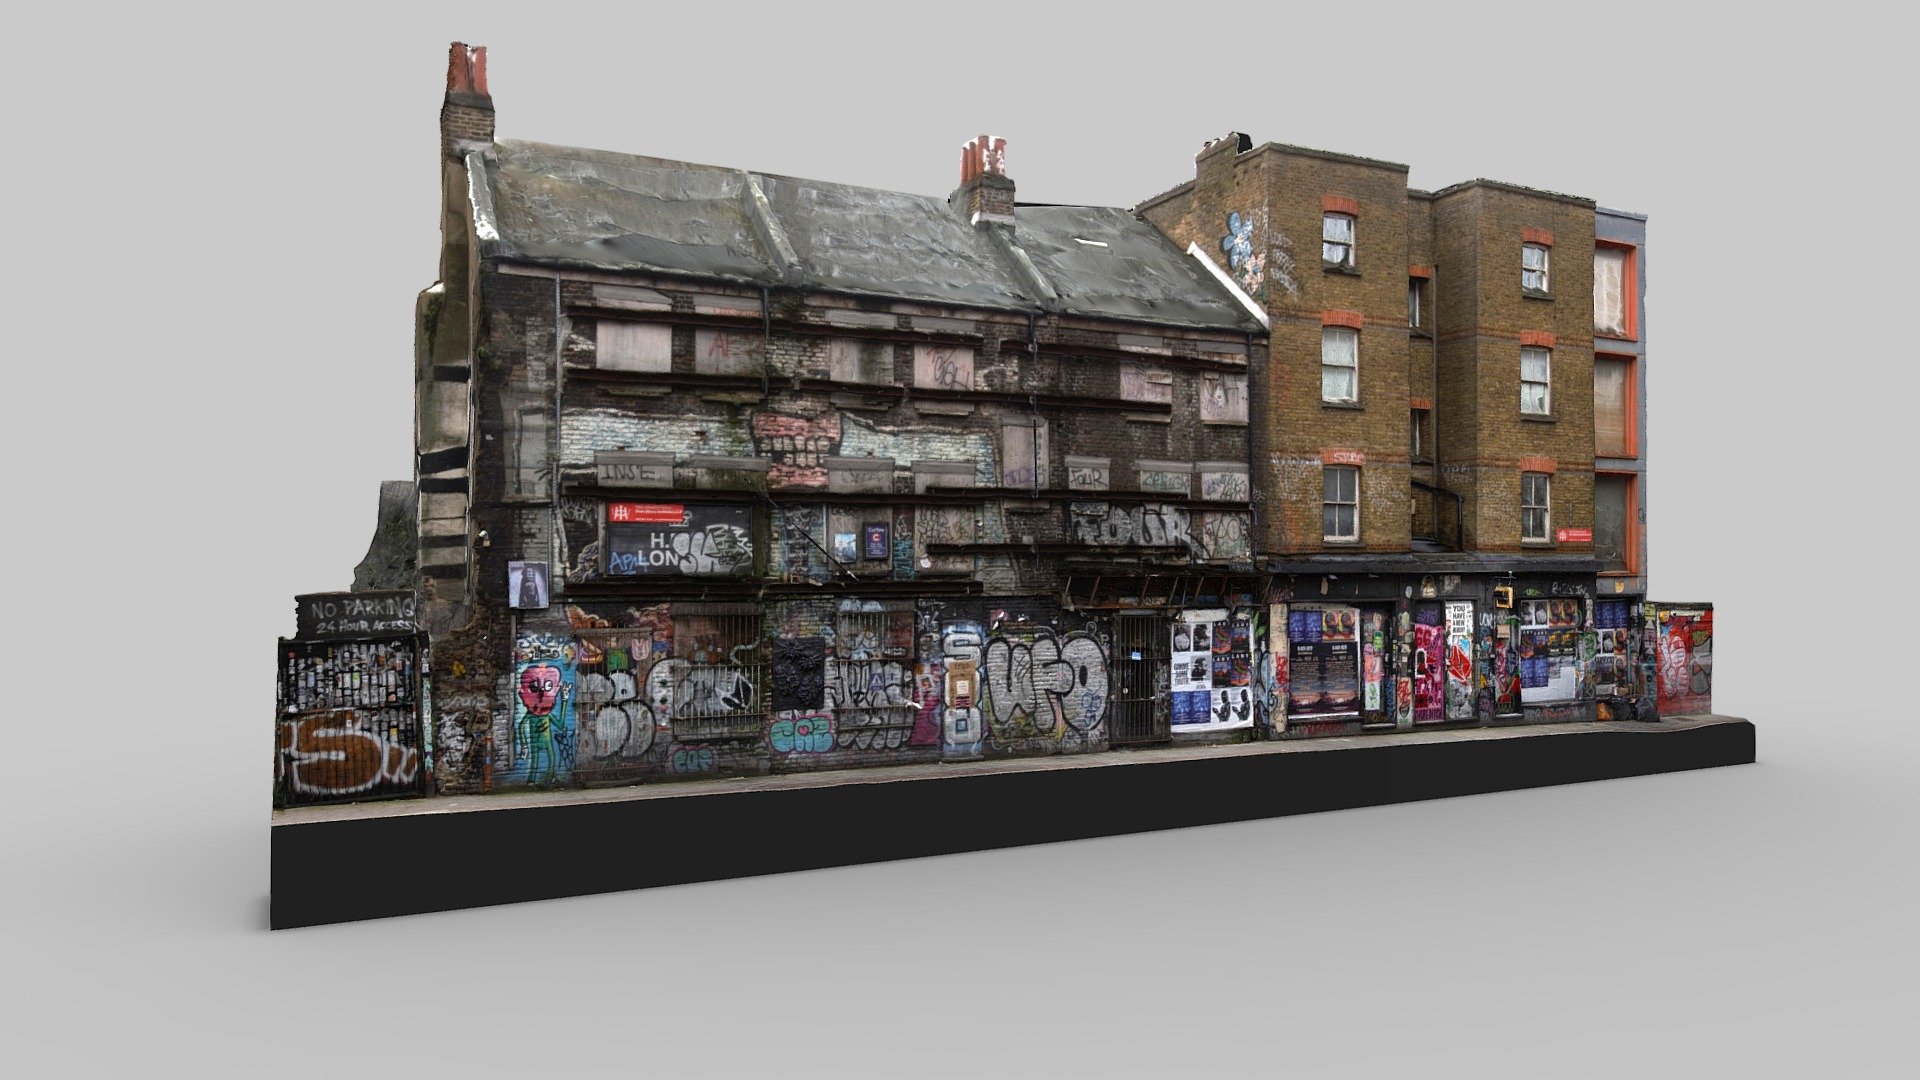 A terrace of derelict houses at 70-74 Scalter Street, Shoreditch, London.

Date: 1720?

https://spitalfieldslife.com/2020/01/20/the-sclater-st-weavers-houses/

234 photos taken in October 2020 with a Sony a6000 and processed in Reality Capture 3d model